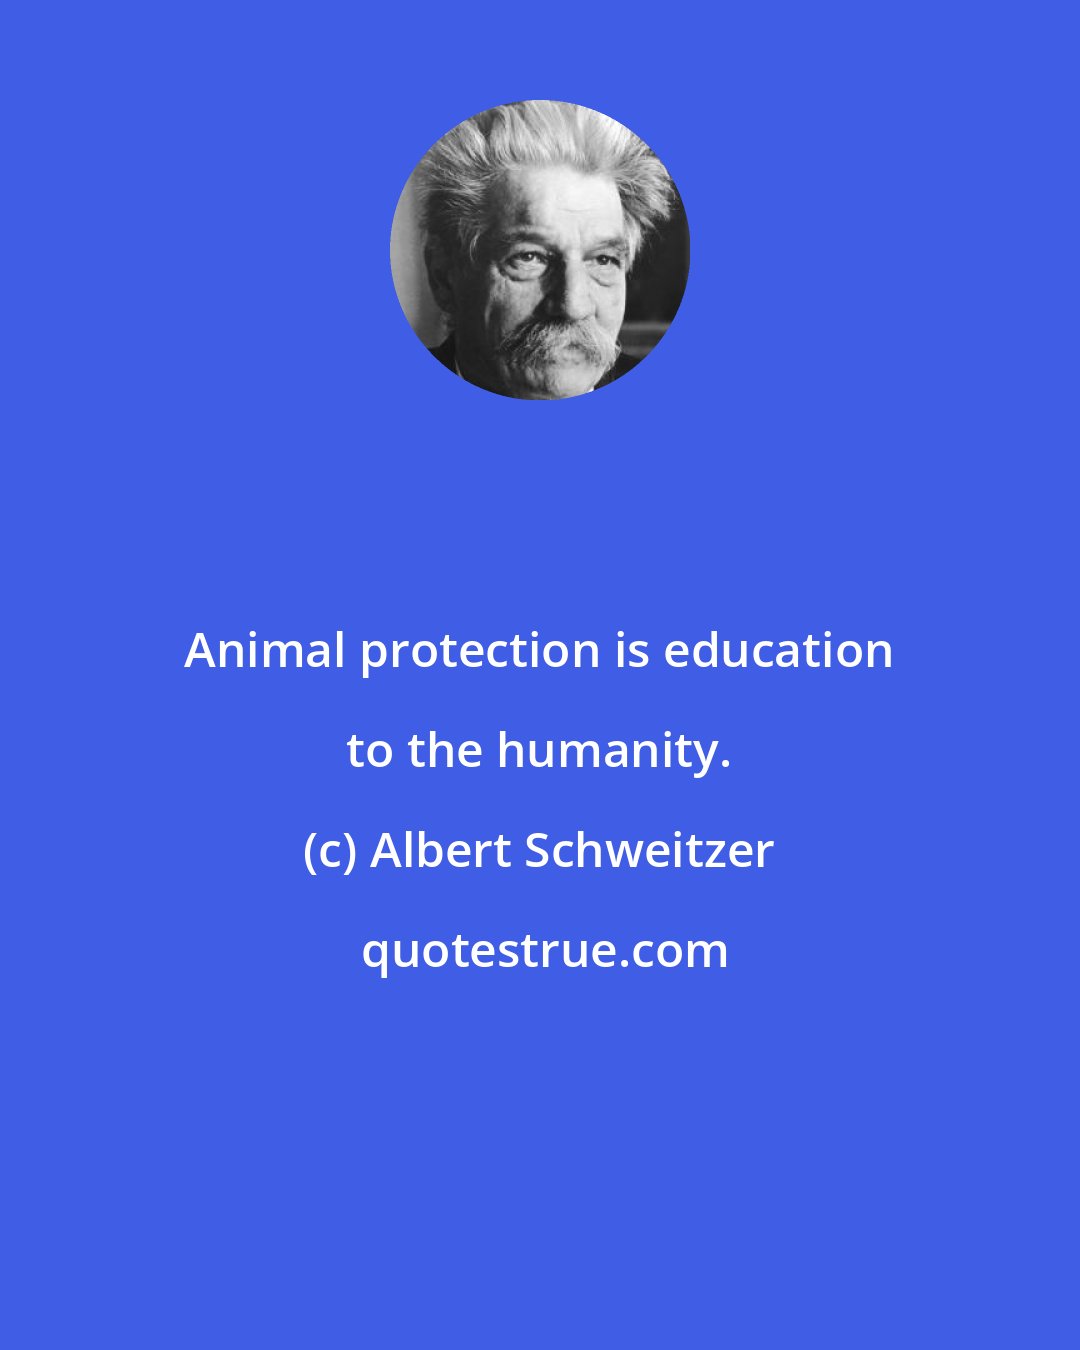 Albert Schweitzer: Animal protection is education to the humanity.